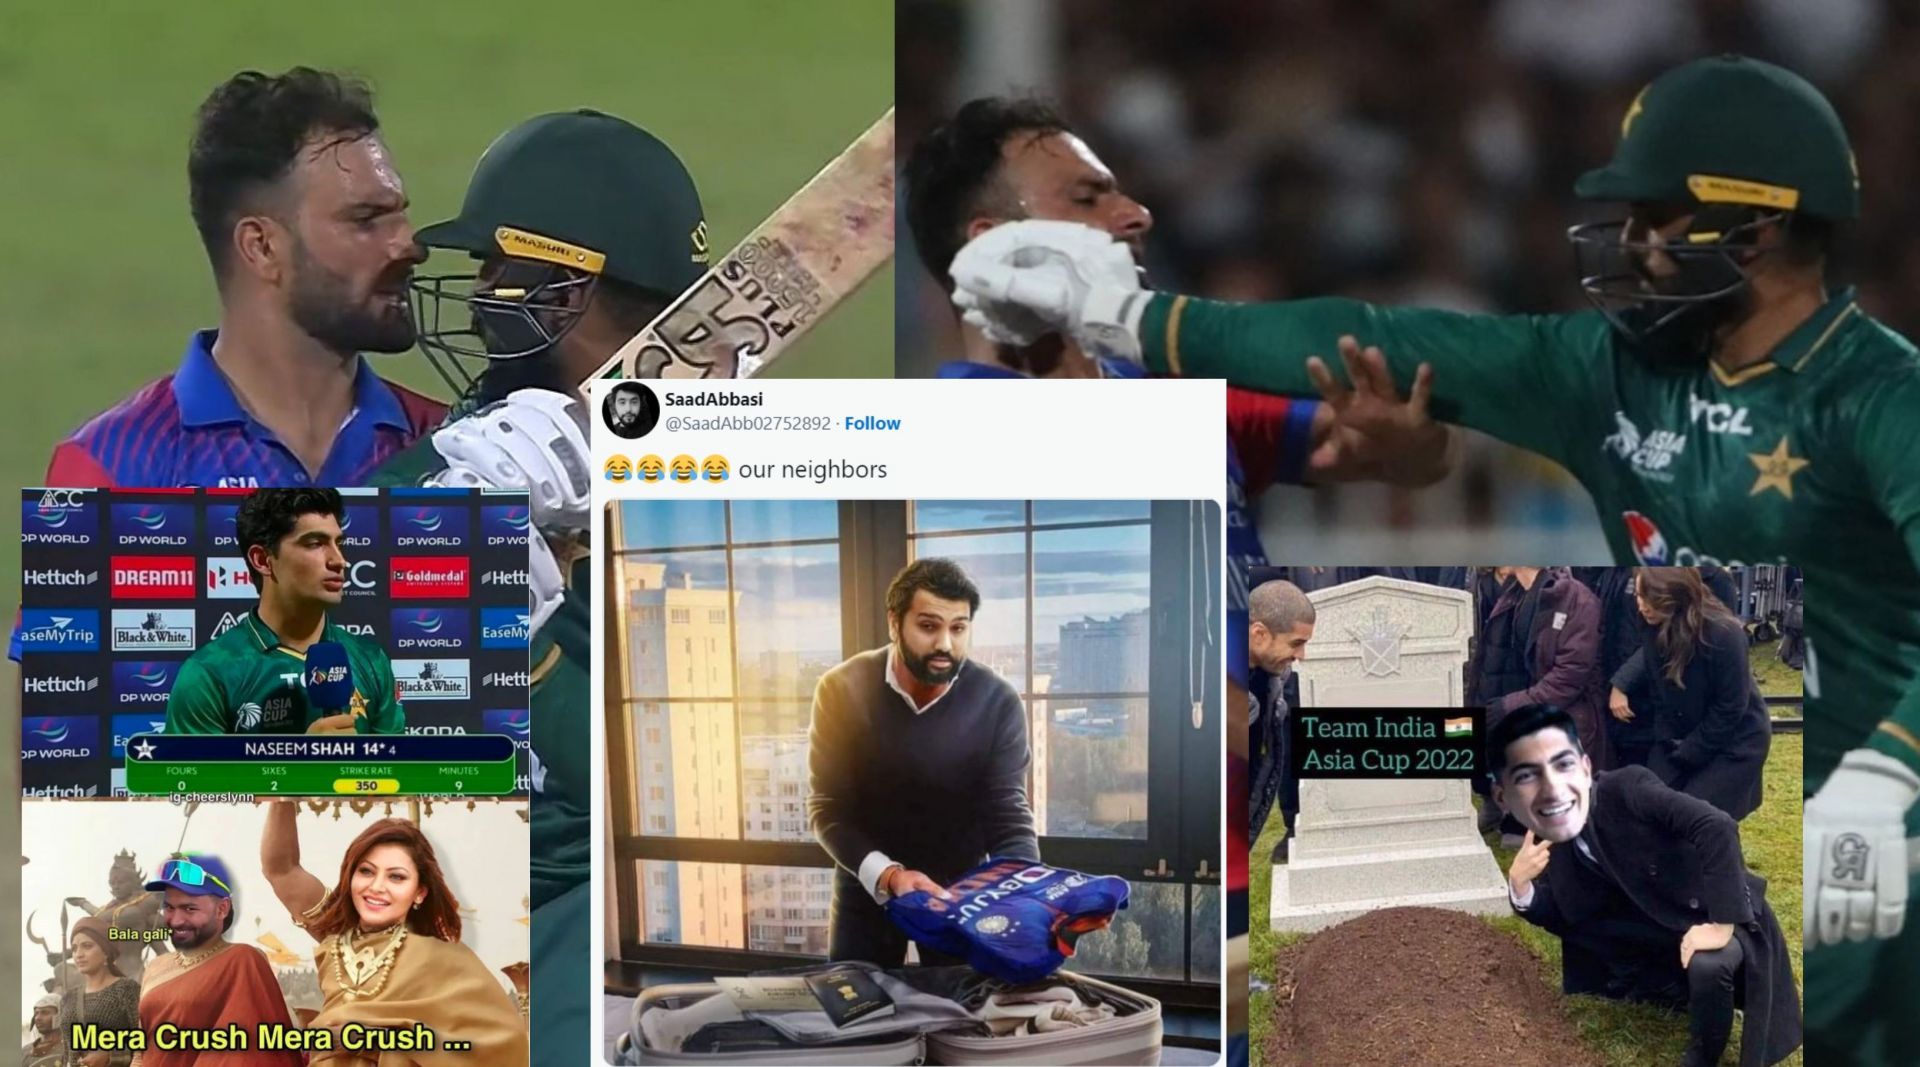 Fans took to social media to share memes after Afghanistan lost against Pakistan on Wednesday